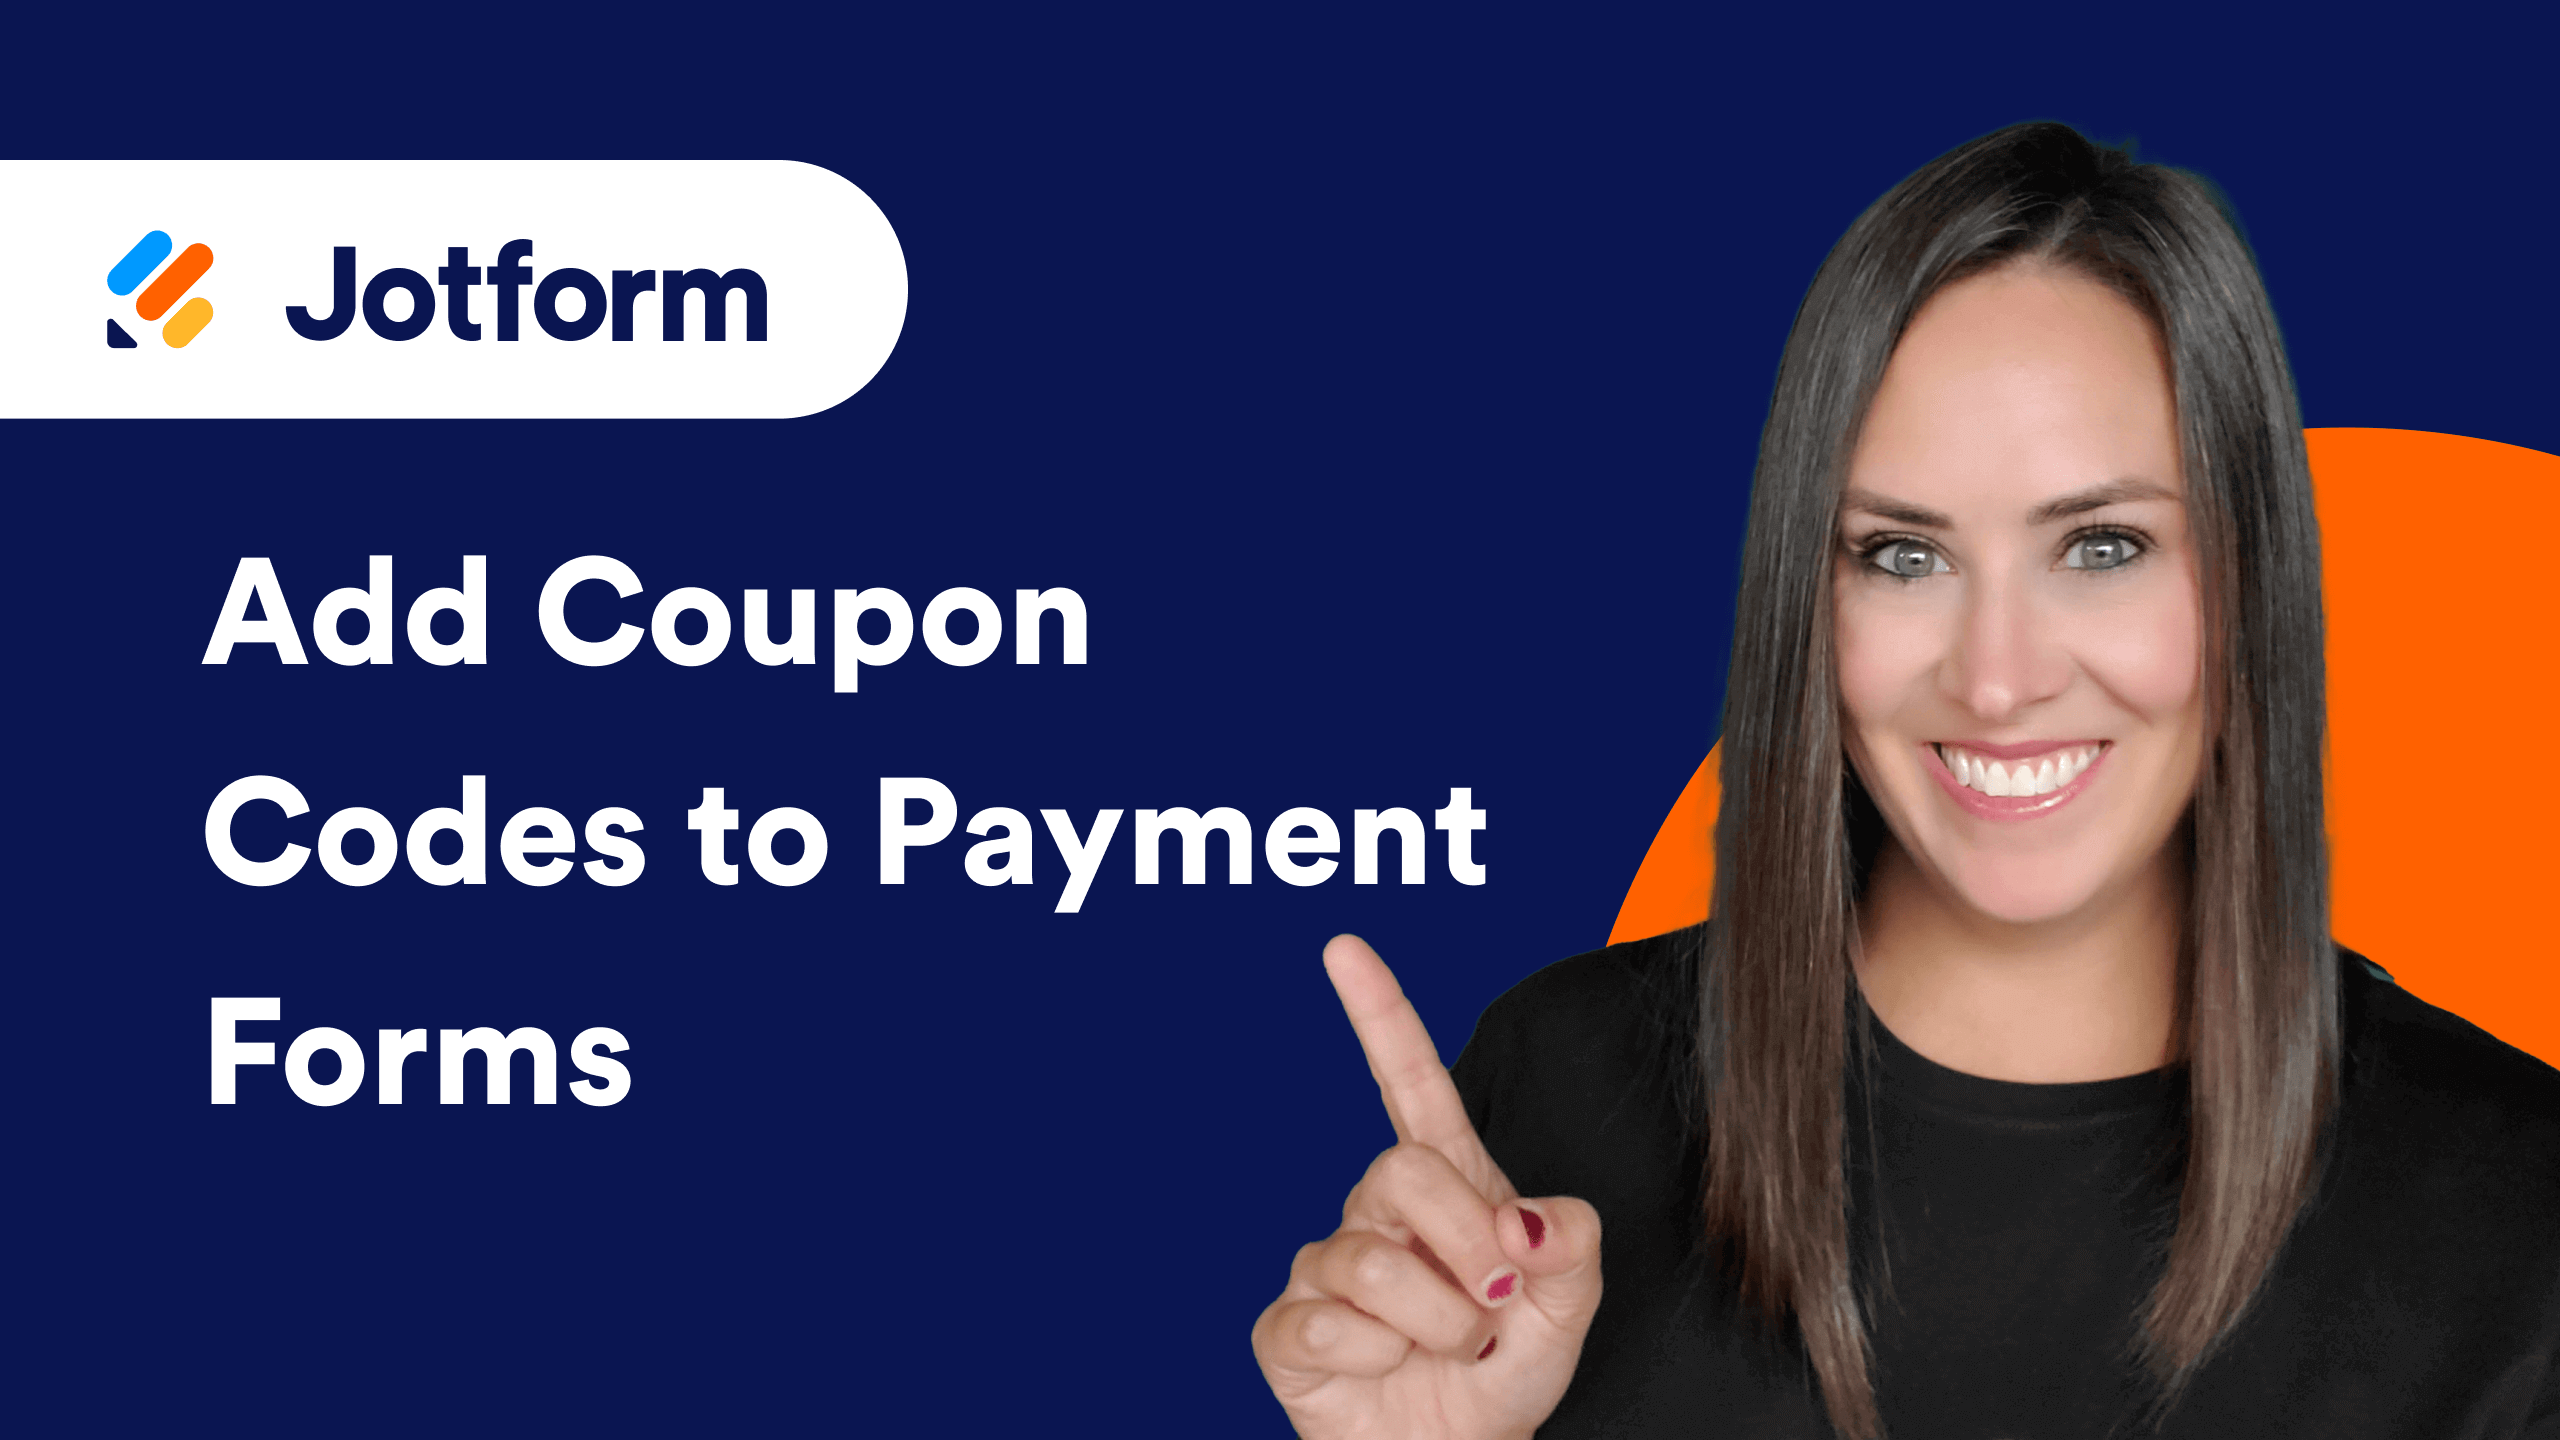 How to add coupon codes to payment forms: